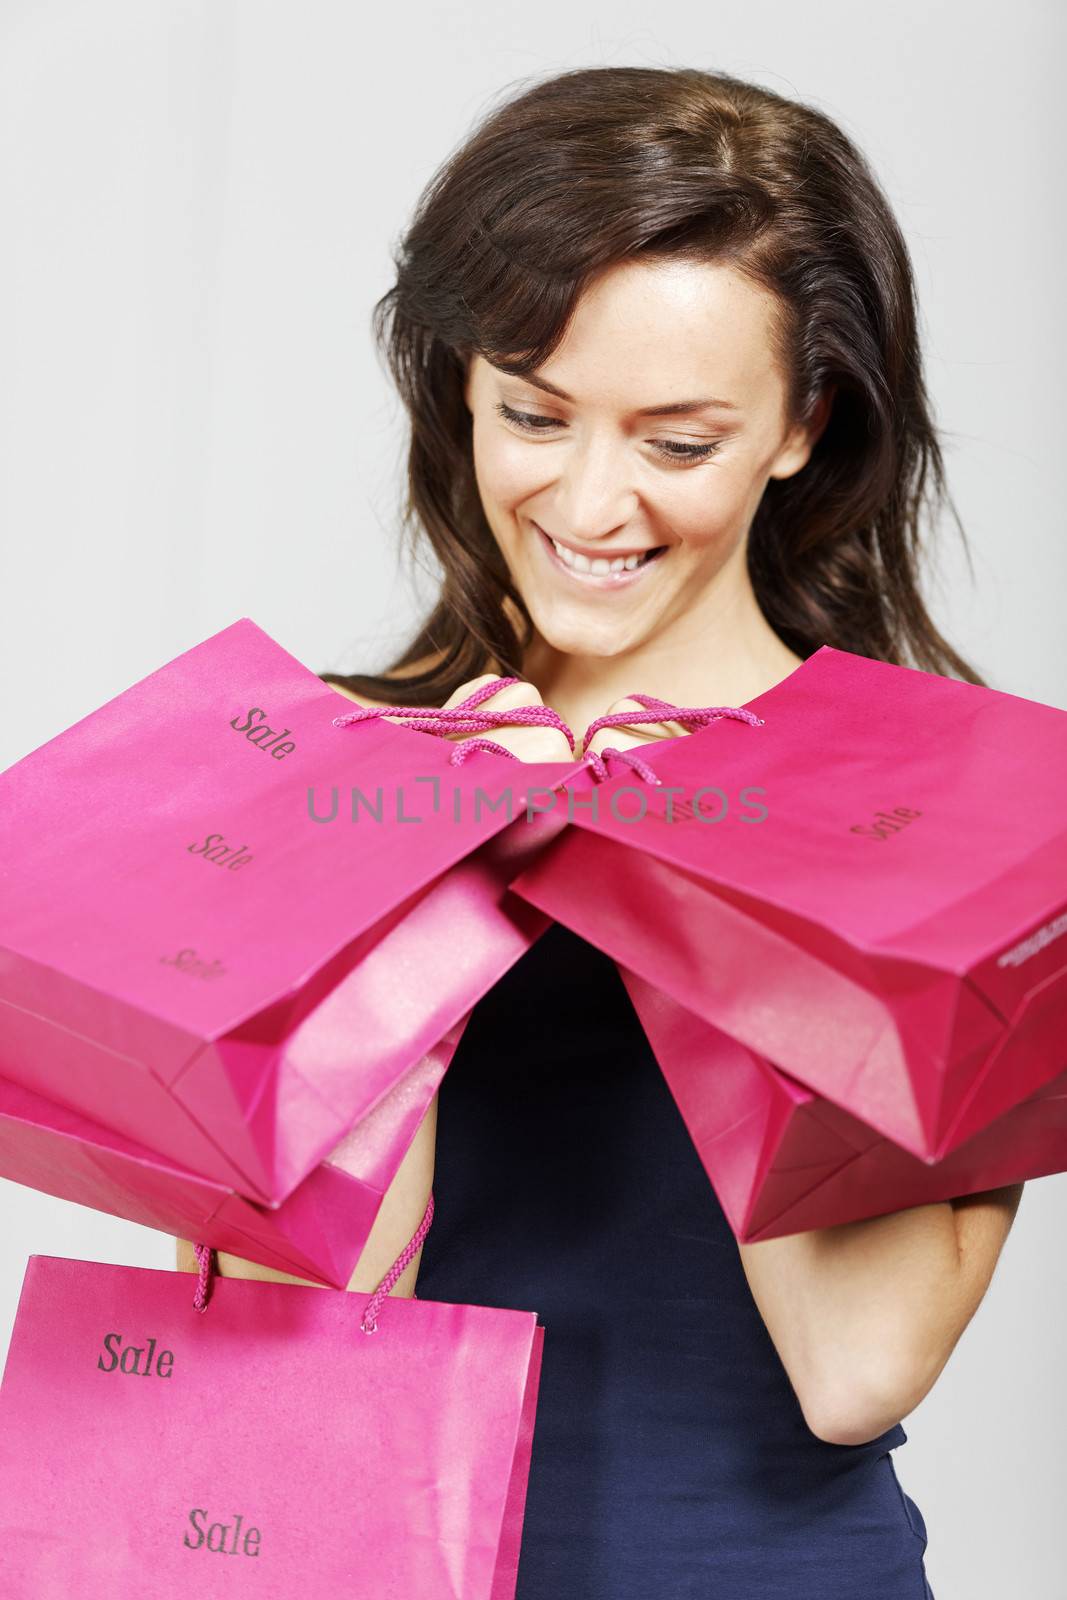 Young woman looking excited with shopping bags from the sales